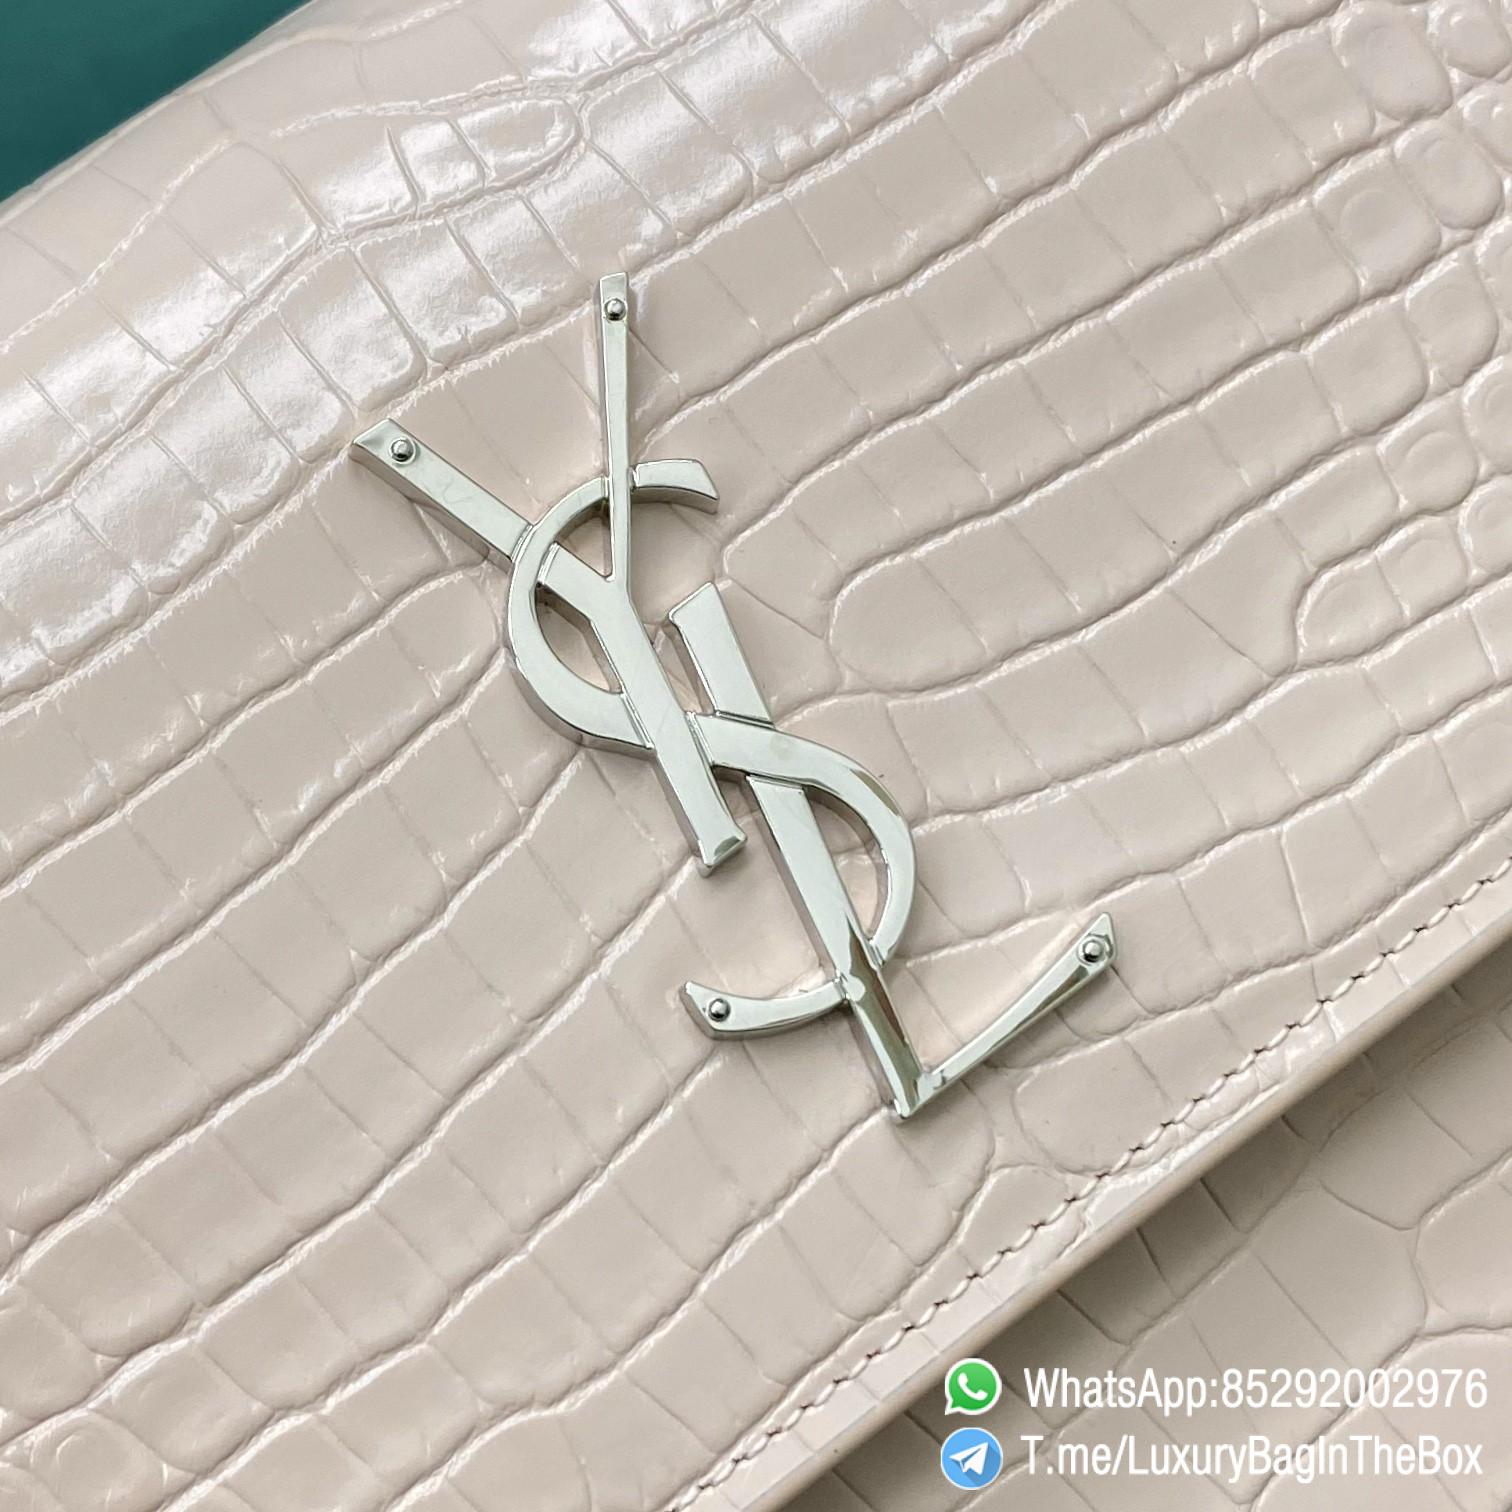 Best Replica YSL Sunset Bag Blanc Vintage Crocodile Embossed Leather with Front Flap Chain and Leather Shoulder Strap Silver Metal Hardware and YSL Initials SKU 442906DND0N9207 07 1